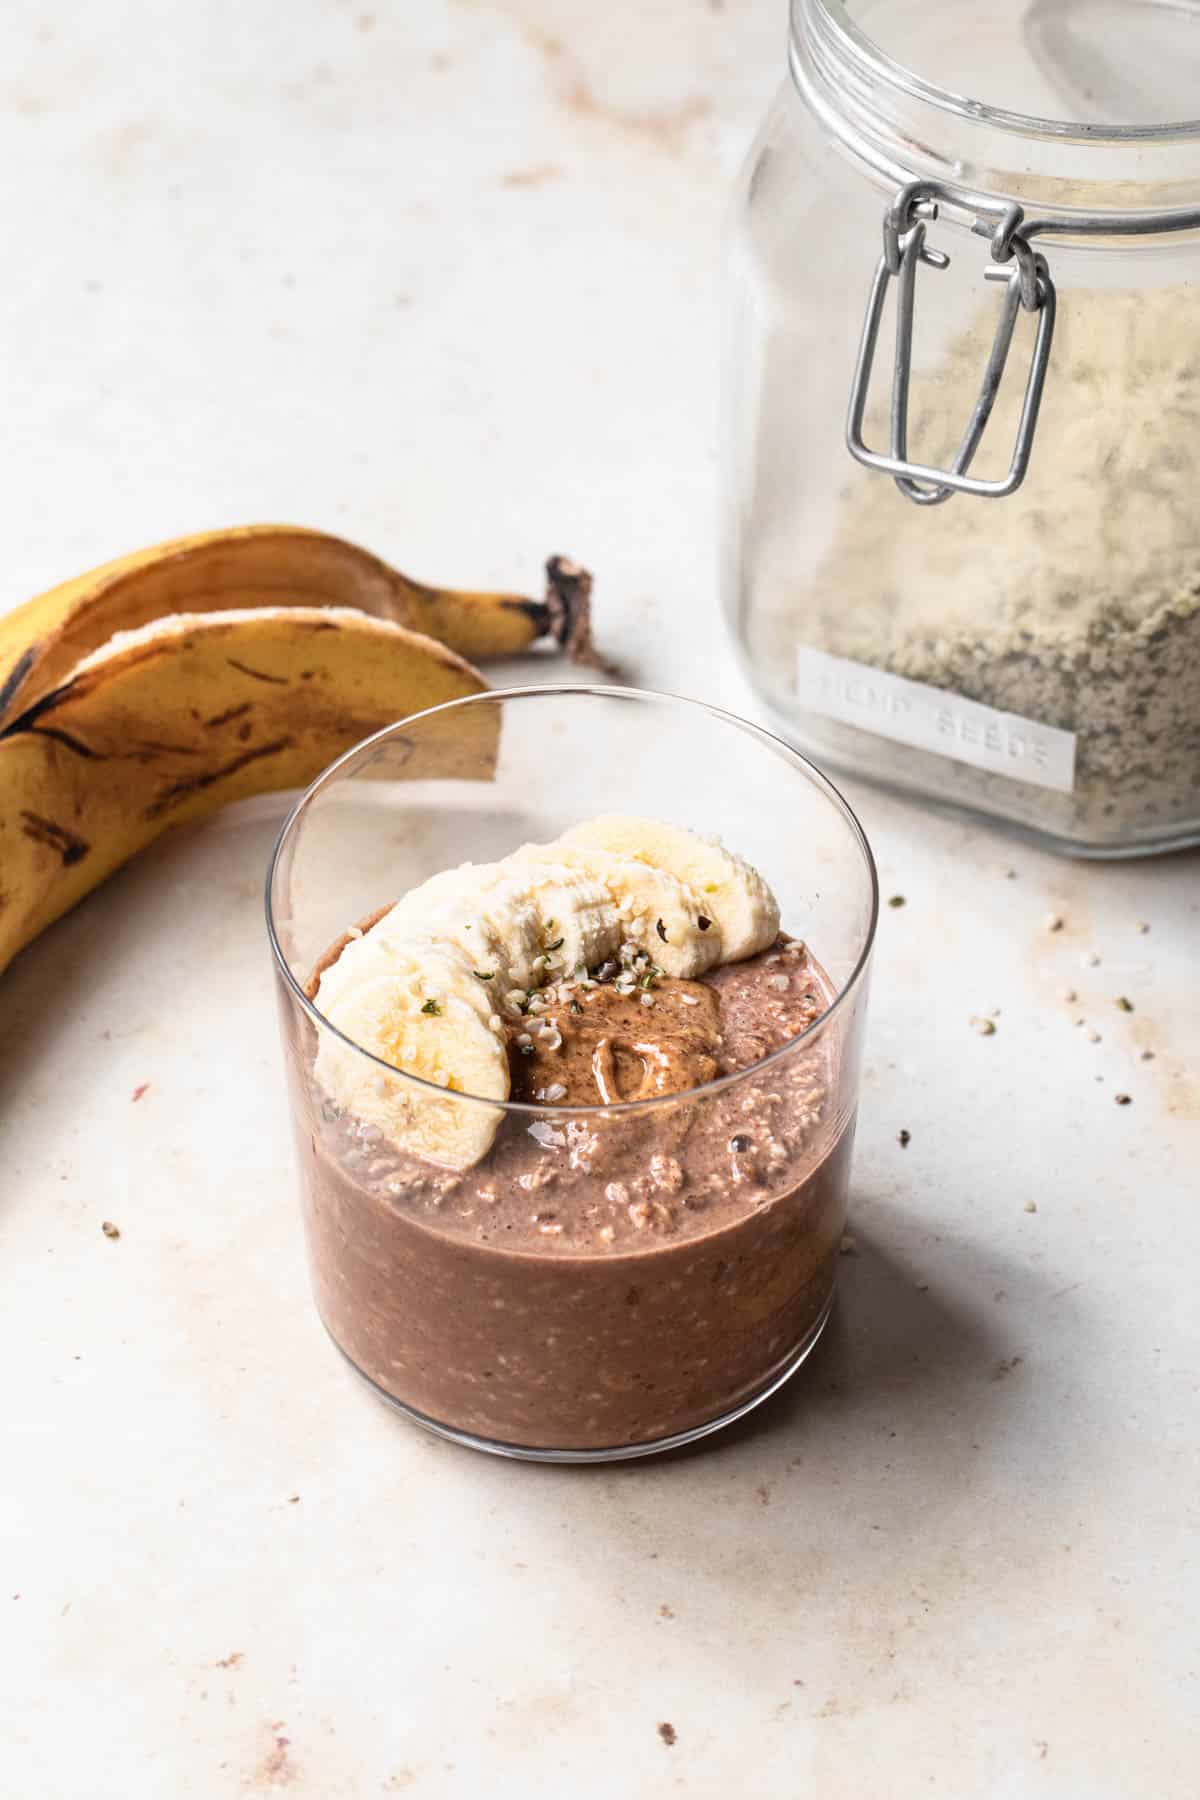 Peanut butter chocolate overnight oats in a glass tumbler, topped with banana slices and hemp seeds.